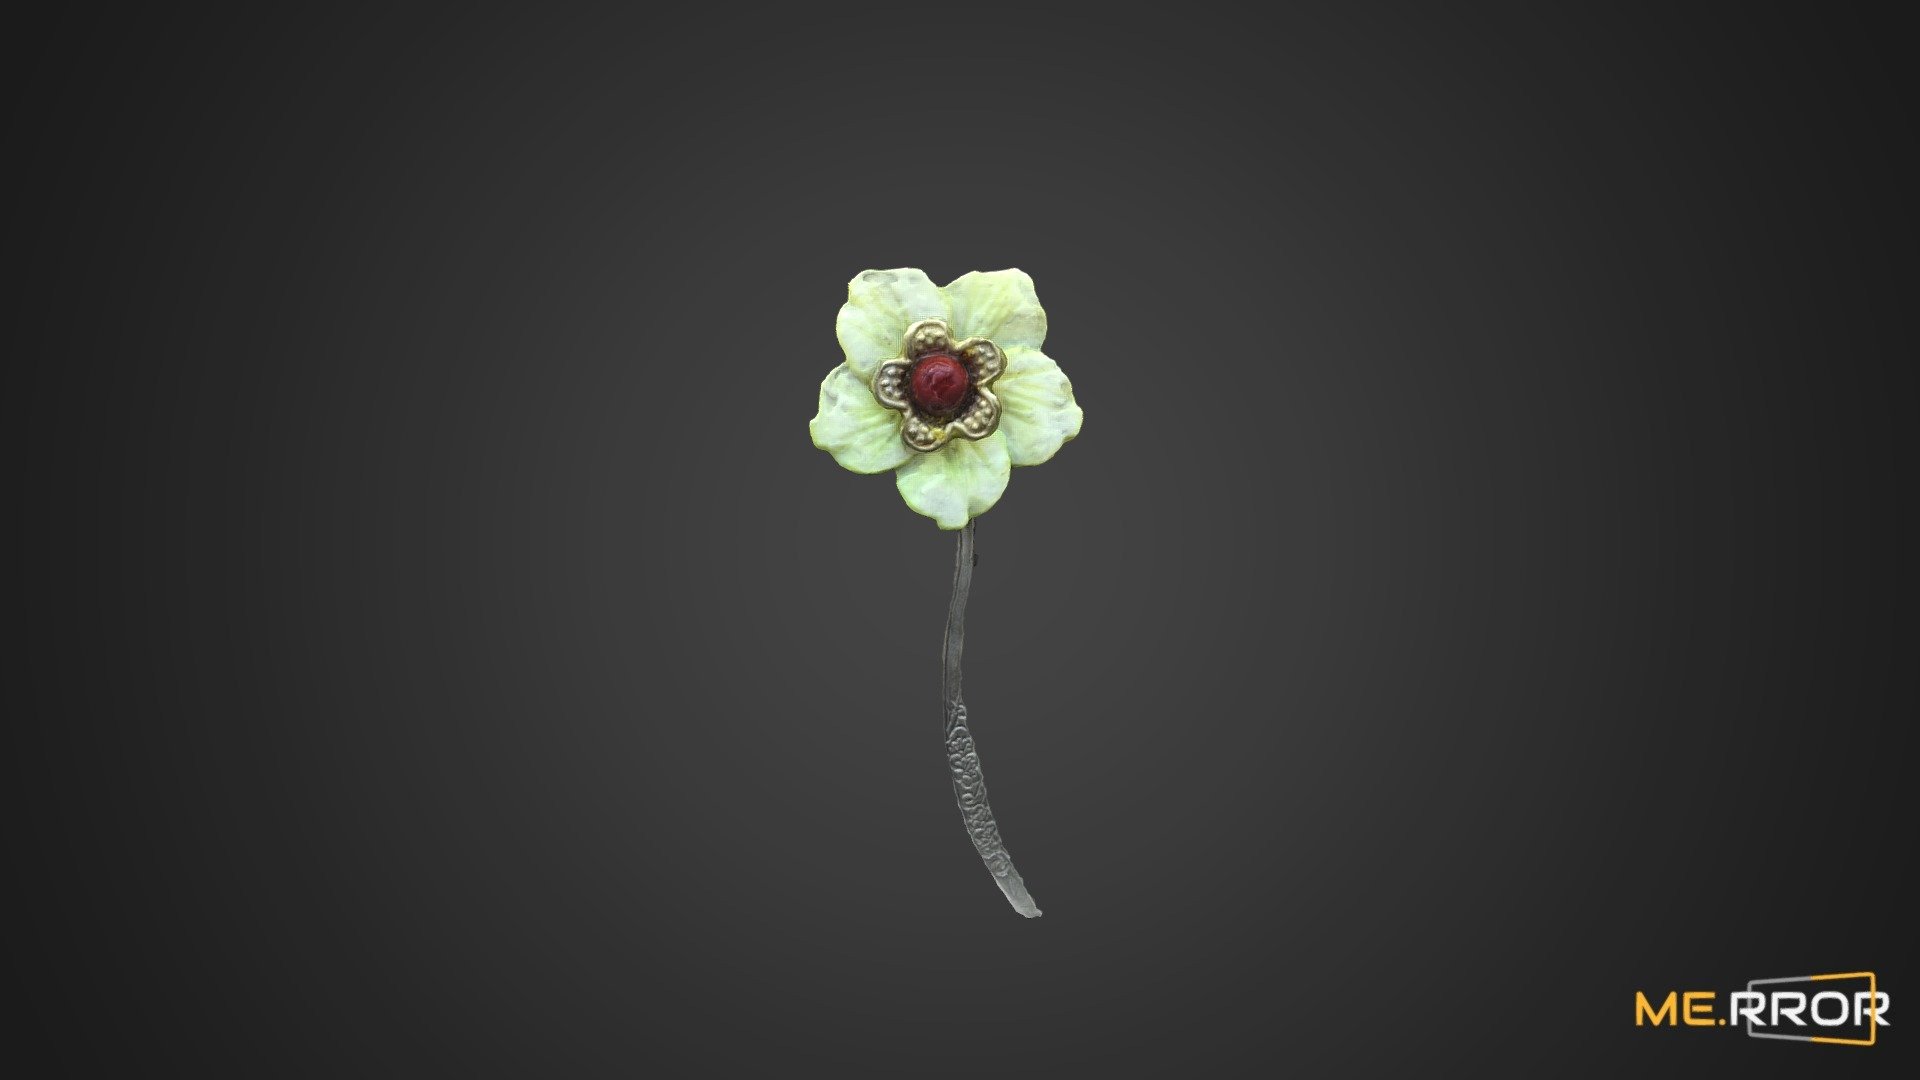 MERROR is a 3D Content PLATFORM which introduces various Asian assets to the 3D world

#3DScanning #Photogrametry #ME.RROR - Korea Traditional Hairpin - Buy Royalty Free 3D model by ME.RROR (@merror) 3d model